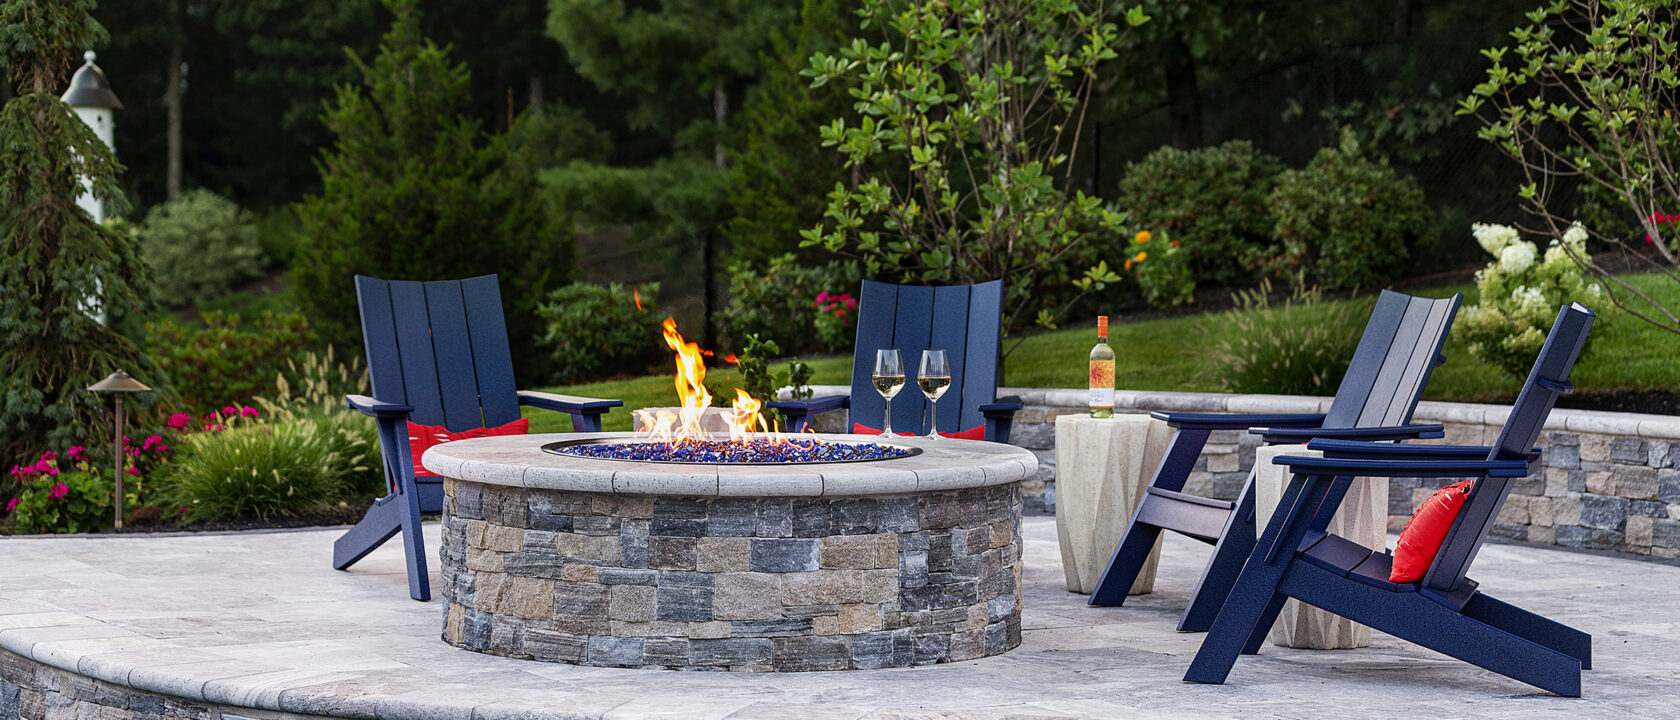 Gas fire pit with chairs and a bottle of wine. Dex by Terra Fire Feature project in Norfolk, MA.